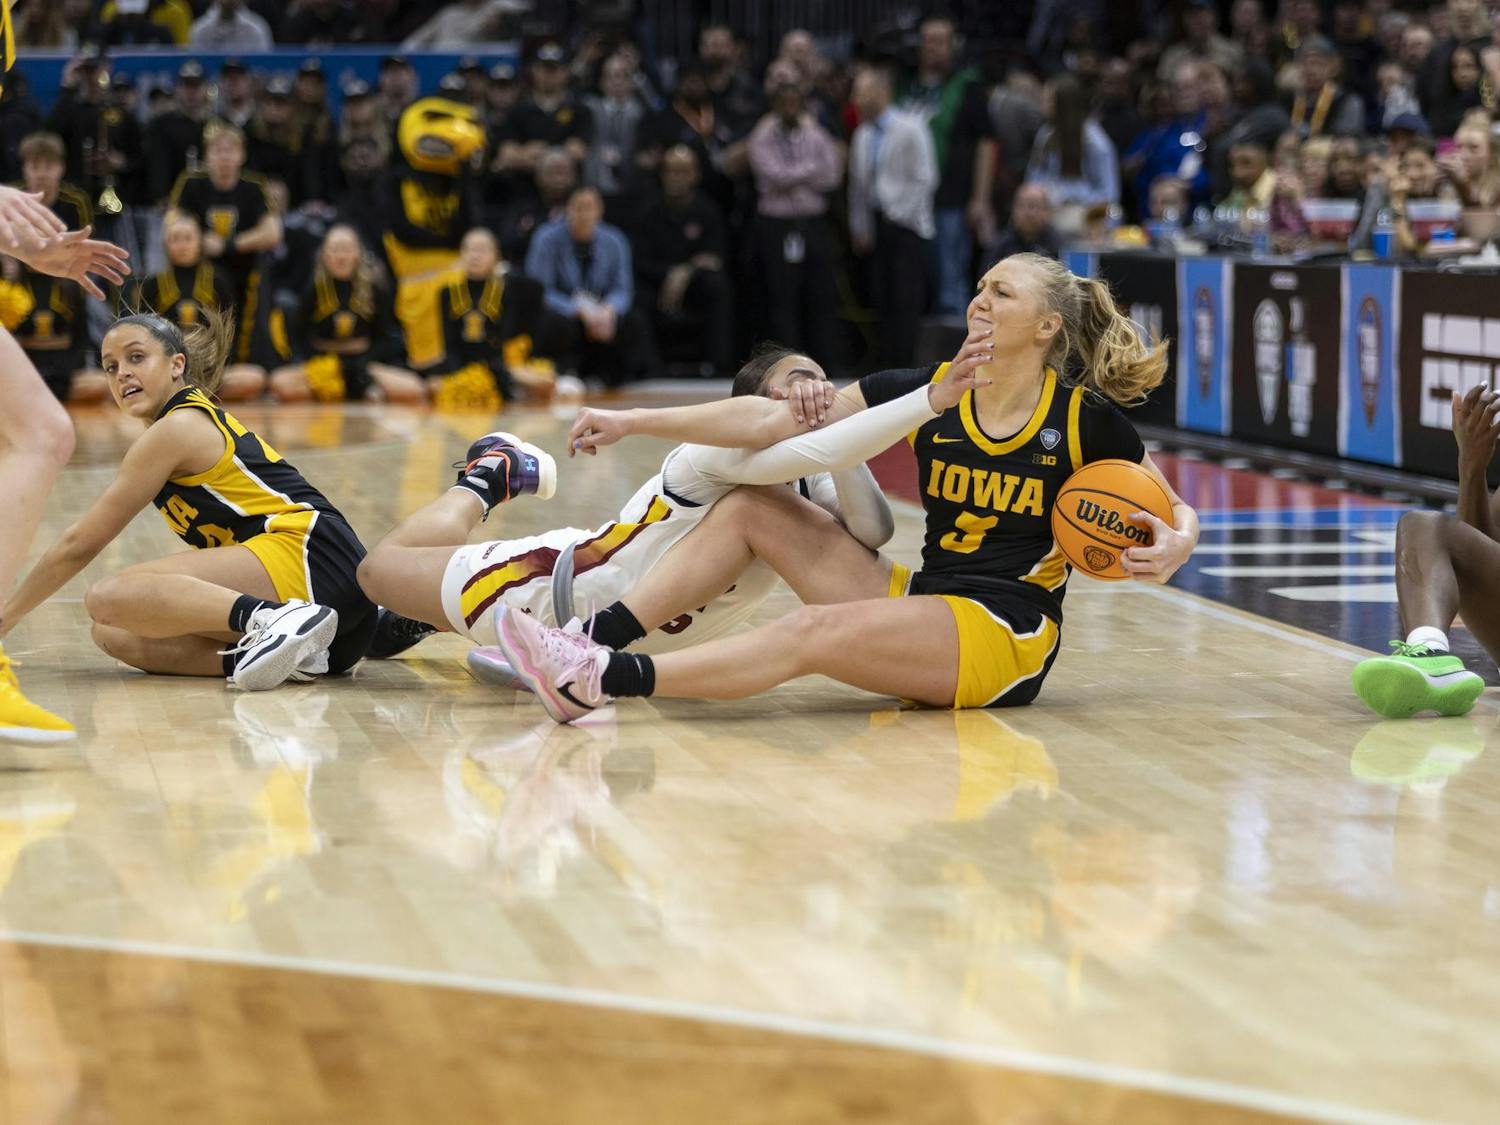 Gamecock freshman guard Tessa Johnson fights to grab the ball from Hawkeye junior guard Sydney Affolter in the final minutes of the national championship game on April 7, 2024. The Gamecocks fought back from an 11 point deficit to win the game 87-75.